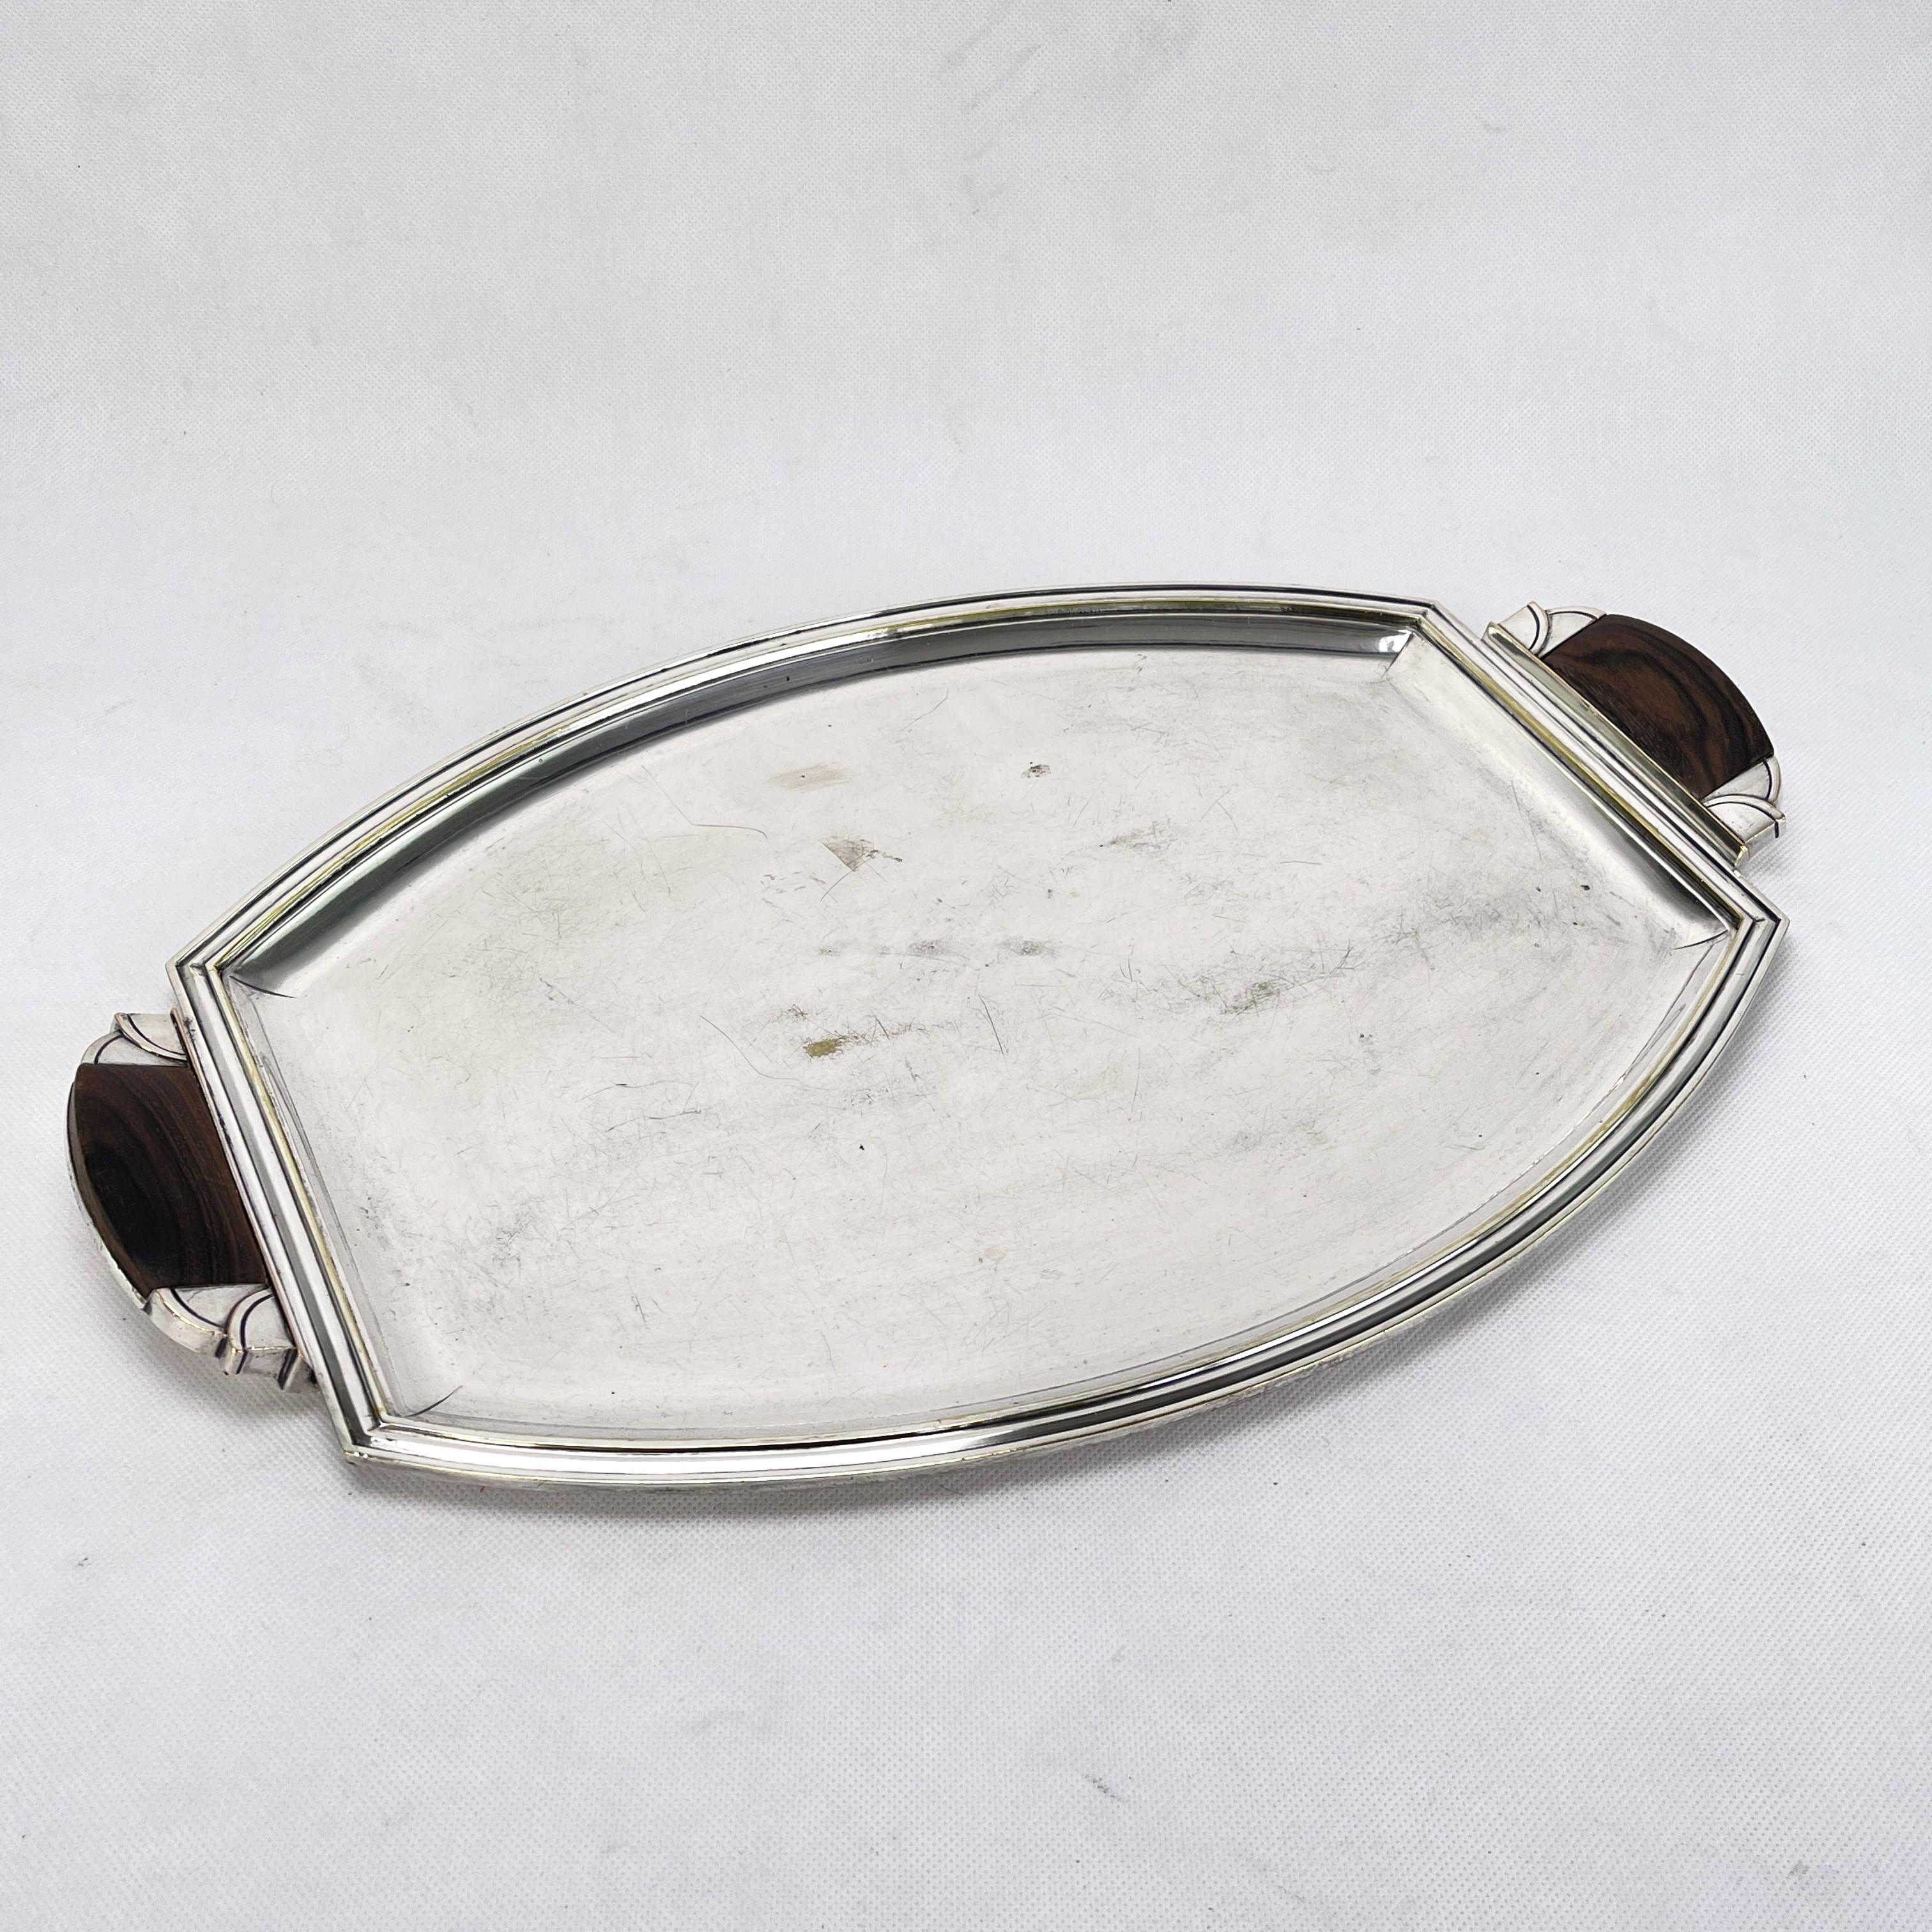 ART DECO Silver Plated Tray, 1930s

This beautiful tray from the 30s is in the style of streamline modern art deco. This style emphasized curvy streamlined shapes. The heavy tray still captivates with it's beautiful straight shape.

The cleaned